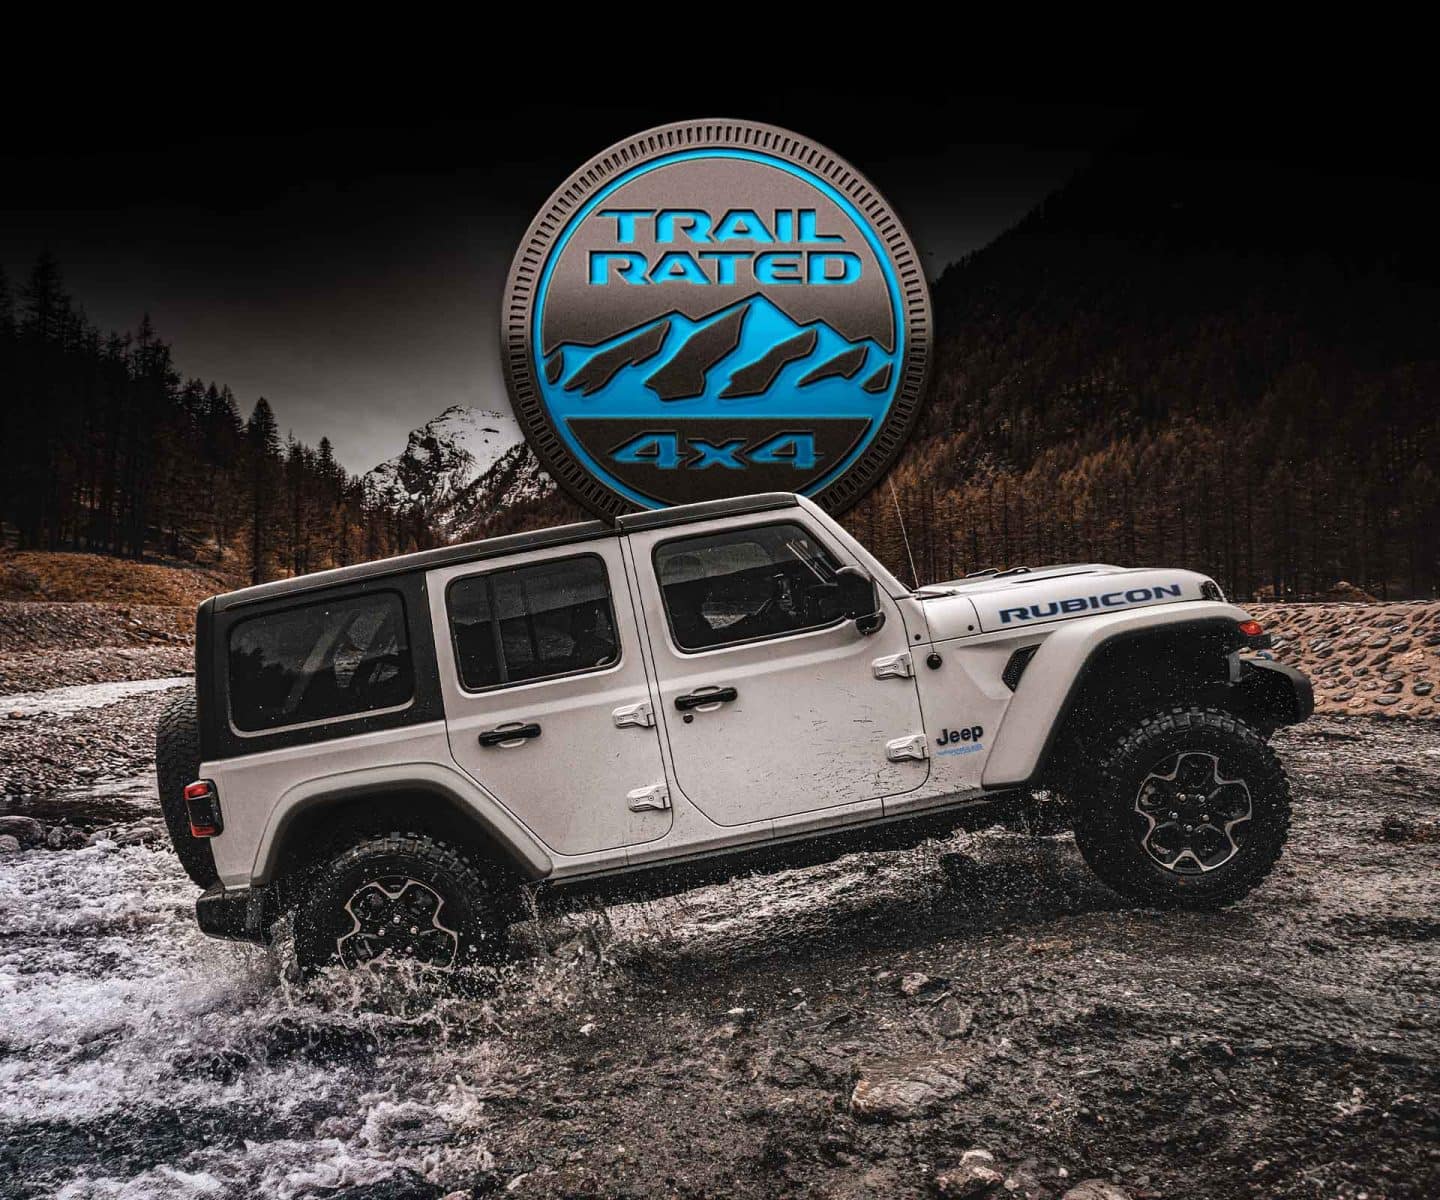 Trail Rated 4x4. The 2023 Jeep Wrangler Rubicon 4xe being driven out of a river and up the bank.